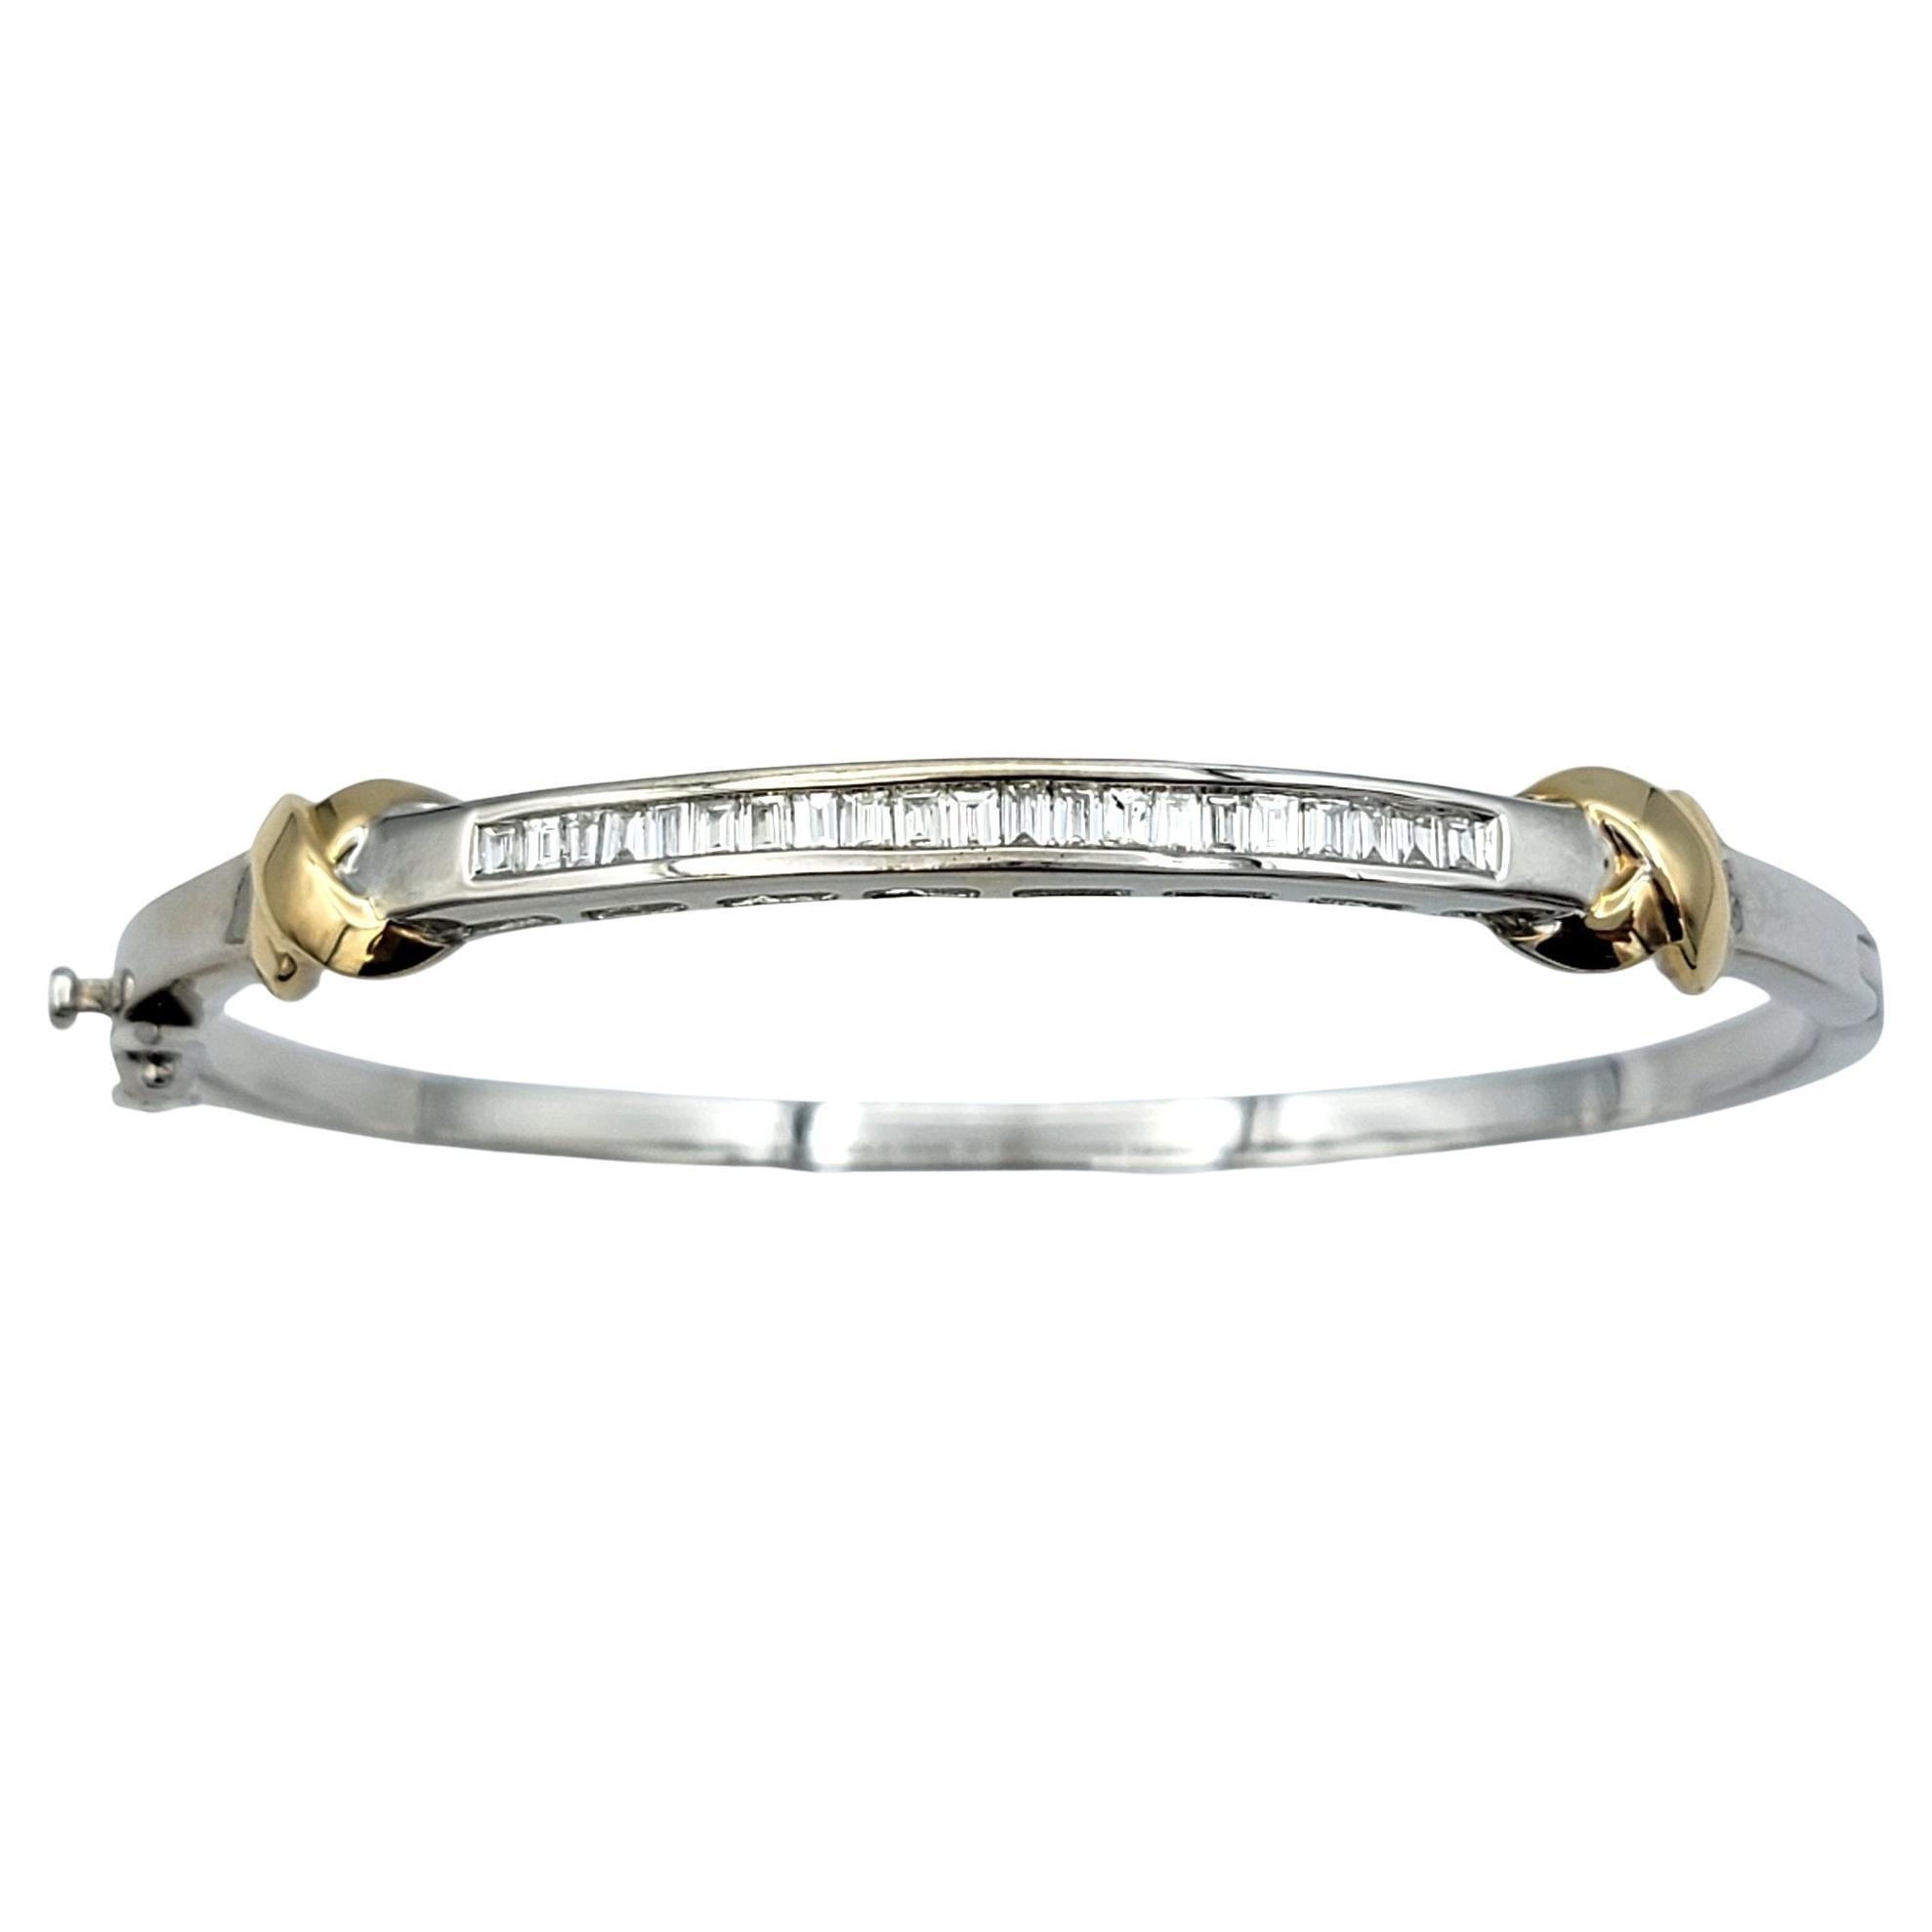 This exquisite hinged bracelet marries the classic elegance of baguette diamonds with a contemporary twist of contrasting white and yellow gold accents. Crafted with meticulous attention to detail, the bracelet features a series of baguette diamonds